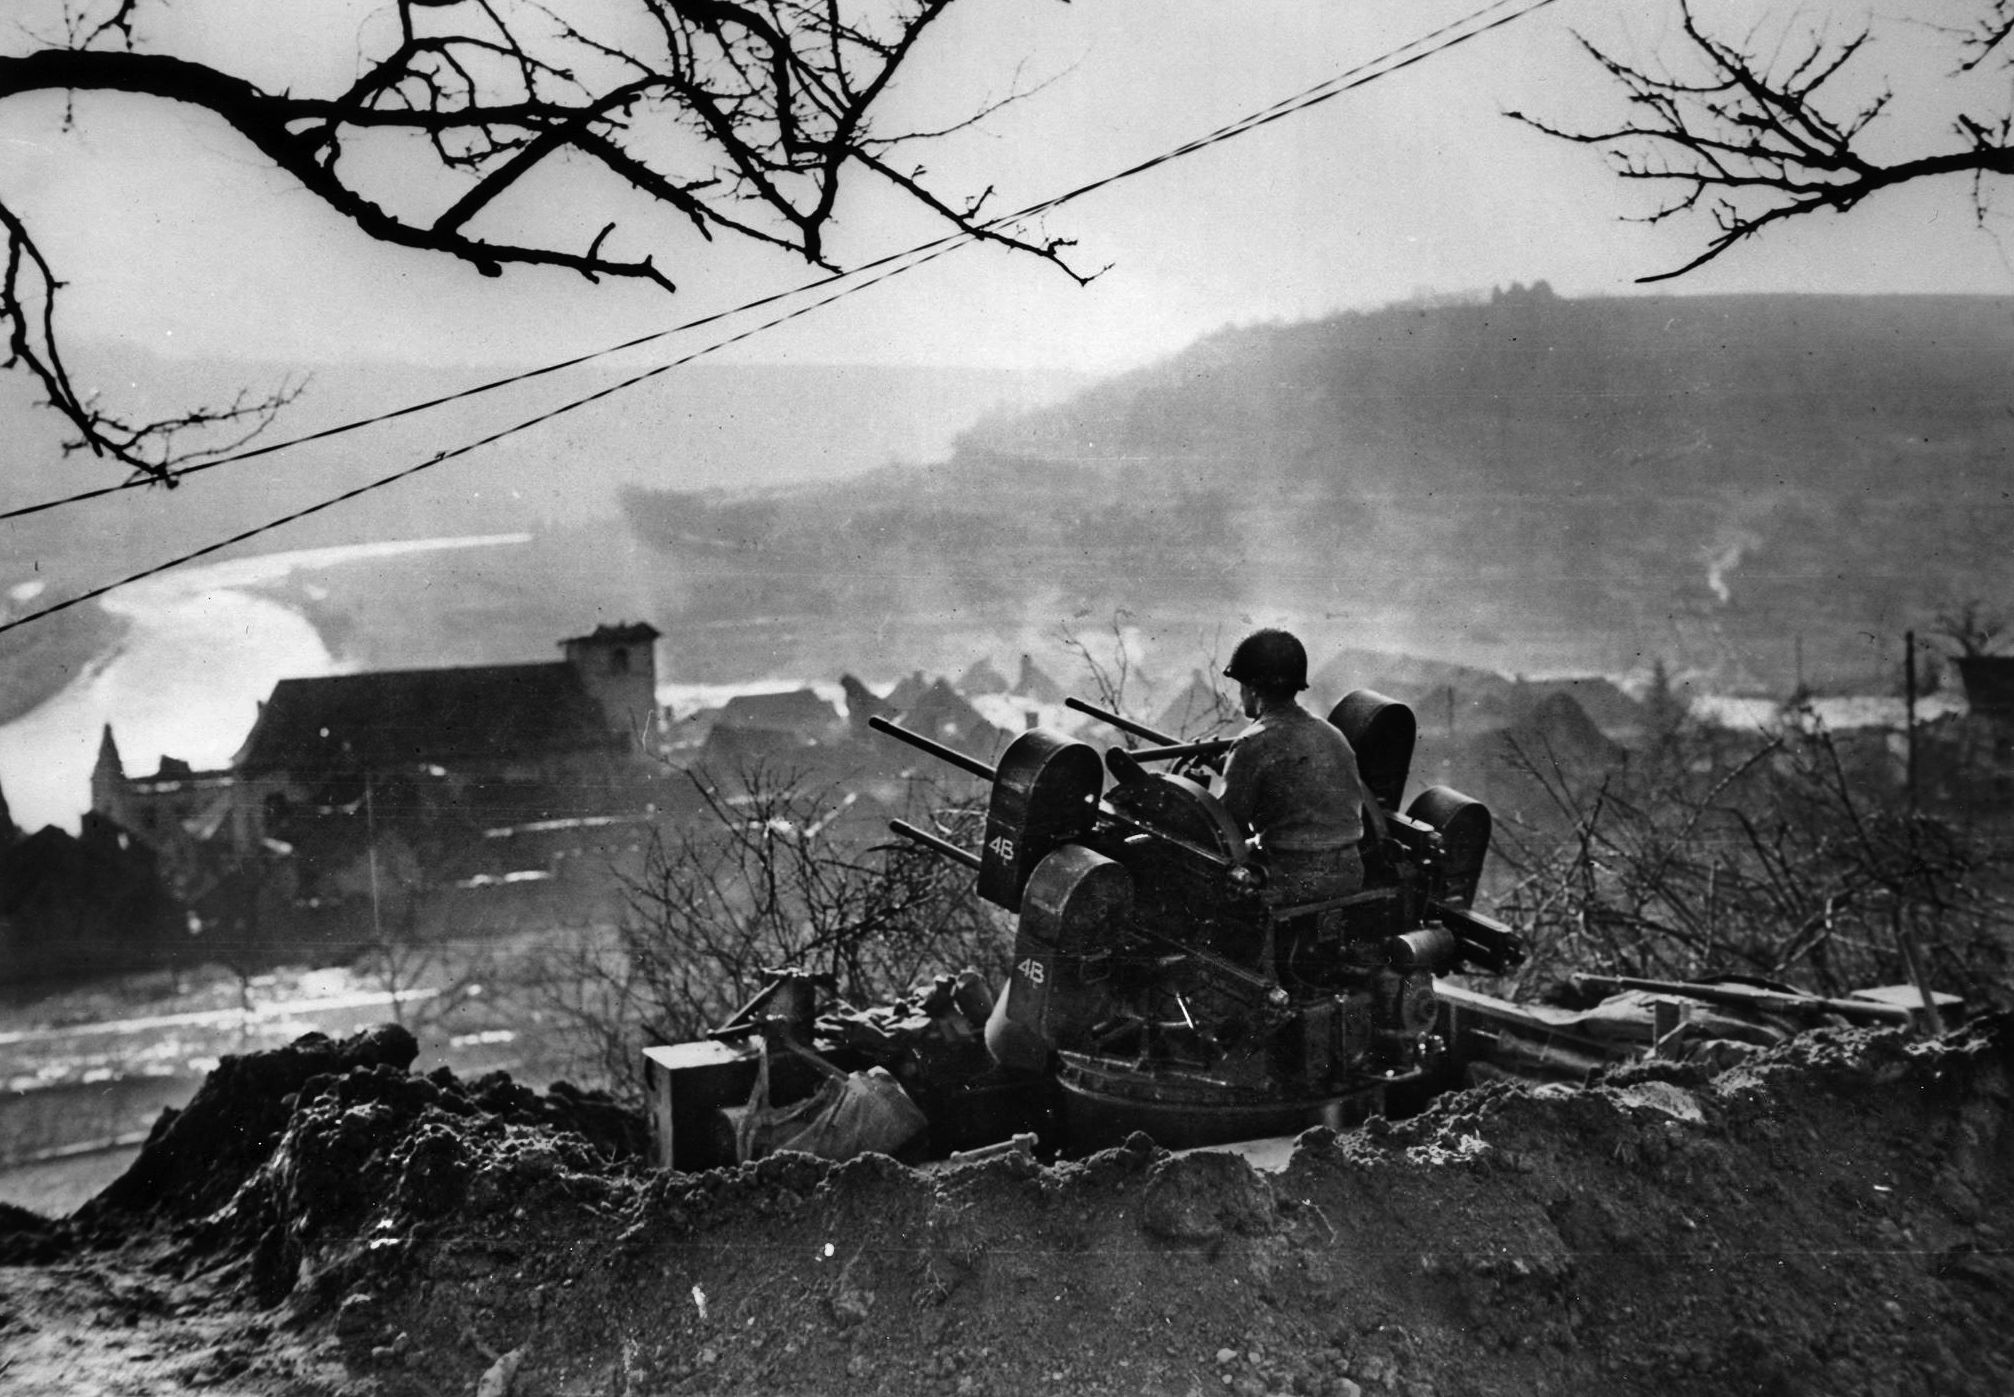 Manning an antiaircraft gun at Wallendorf, Luxembourg, in February 1945, soldiers of the 80th Division look over the Our River. This photo was taken after the reduction of the German advance during the Battle of the Bulge. 